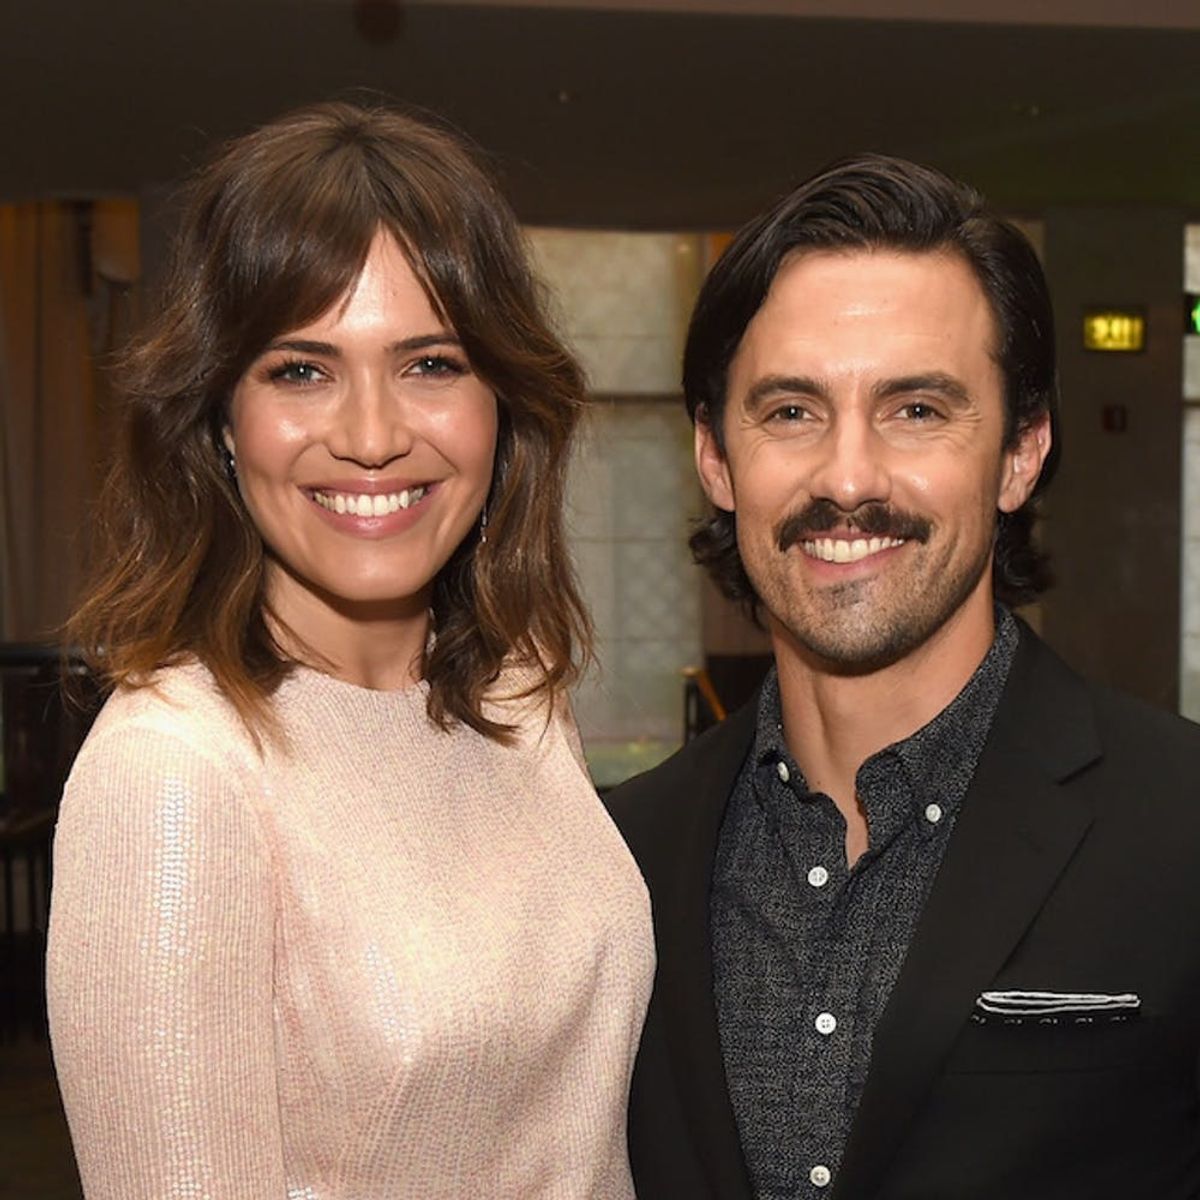 Morning Buzz! Mandy Moore’s Pics from “This Is Us” Season 2’s First Day of Filming Are Everything + More